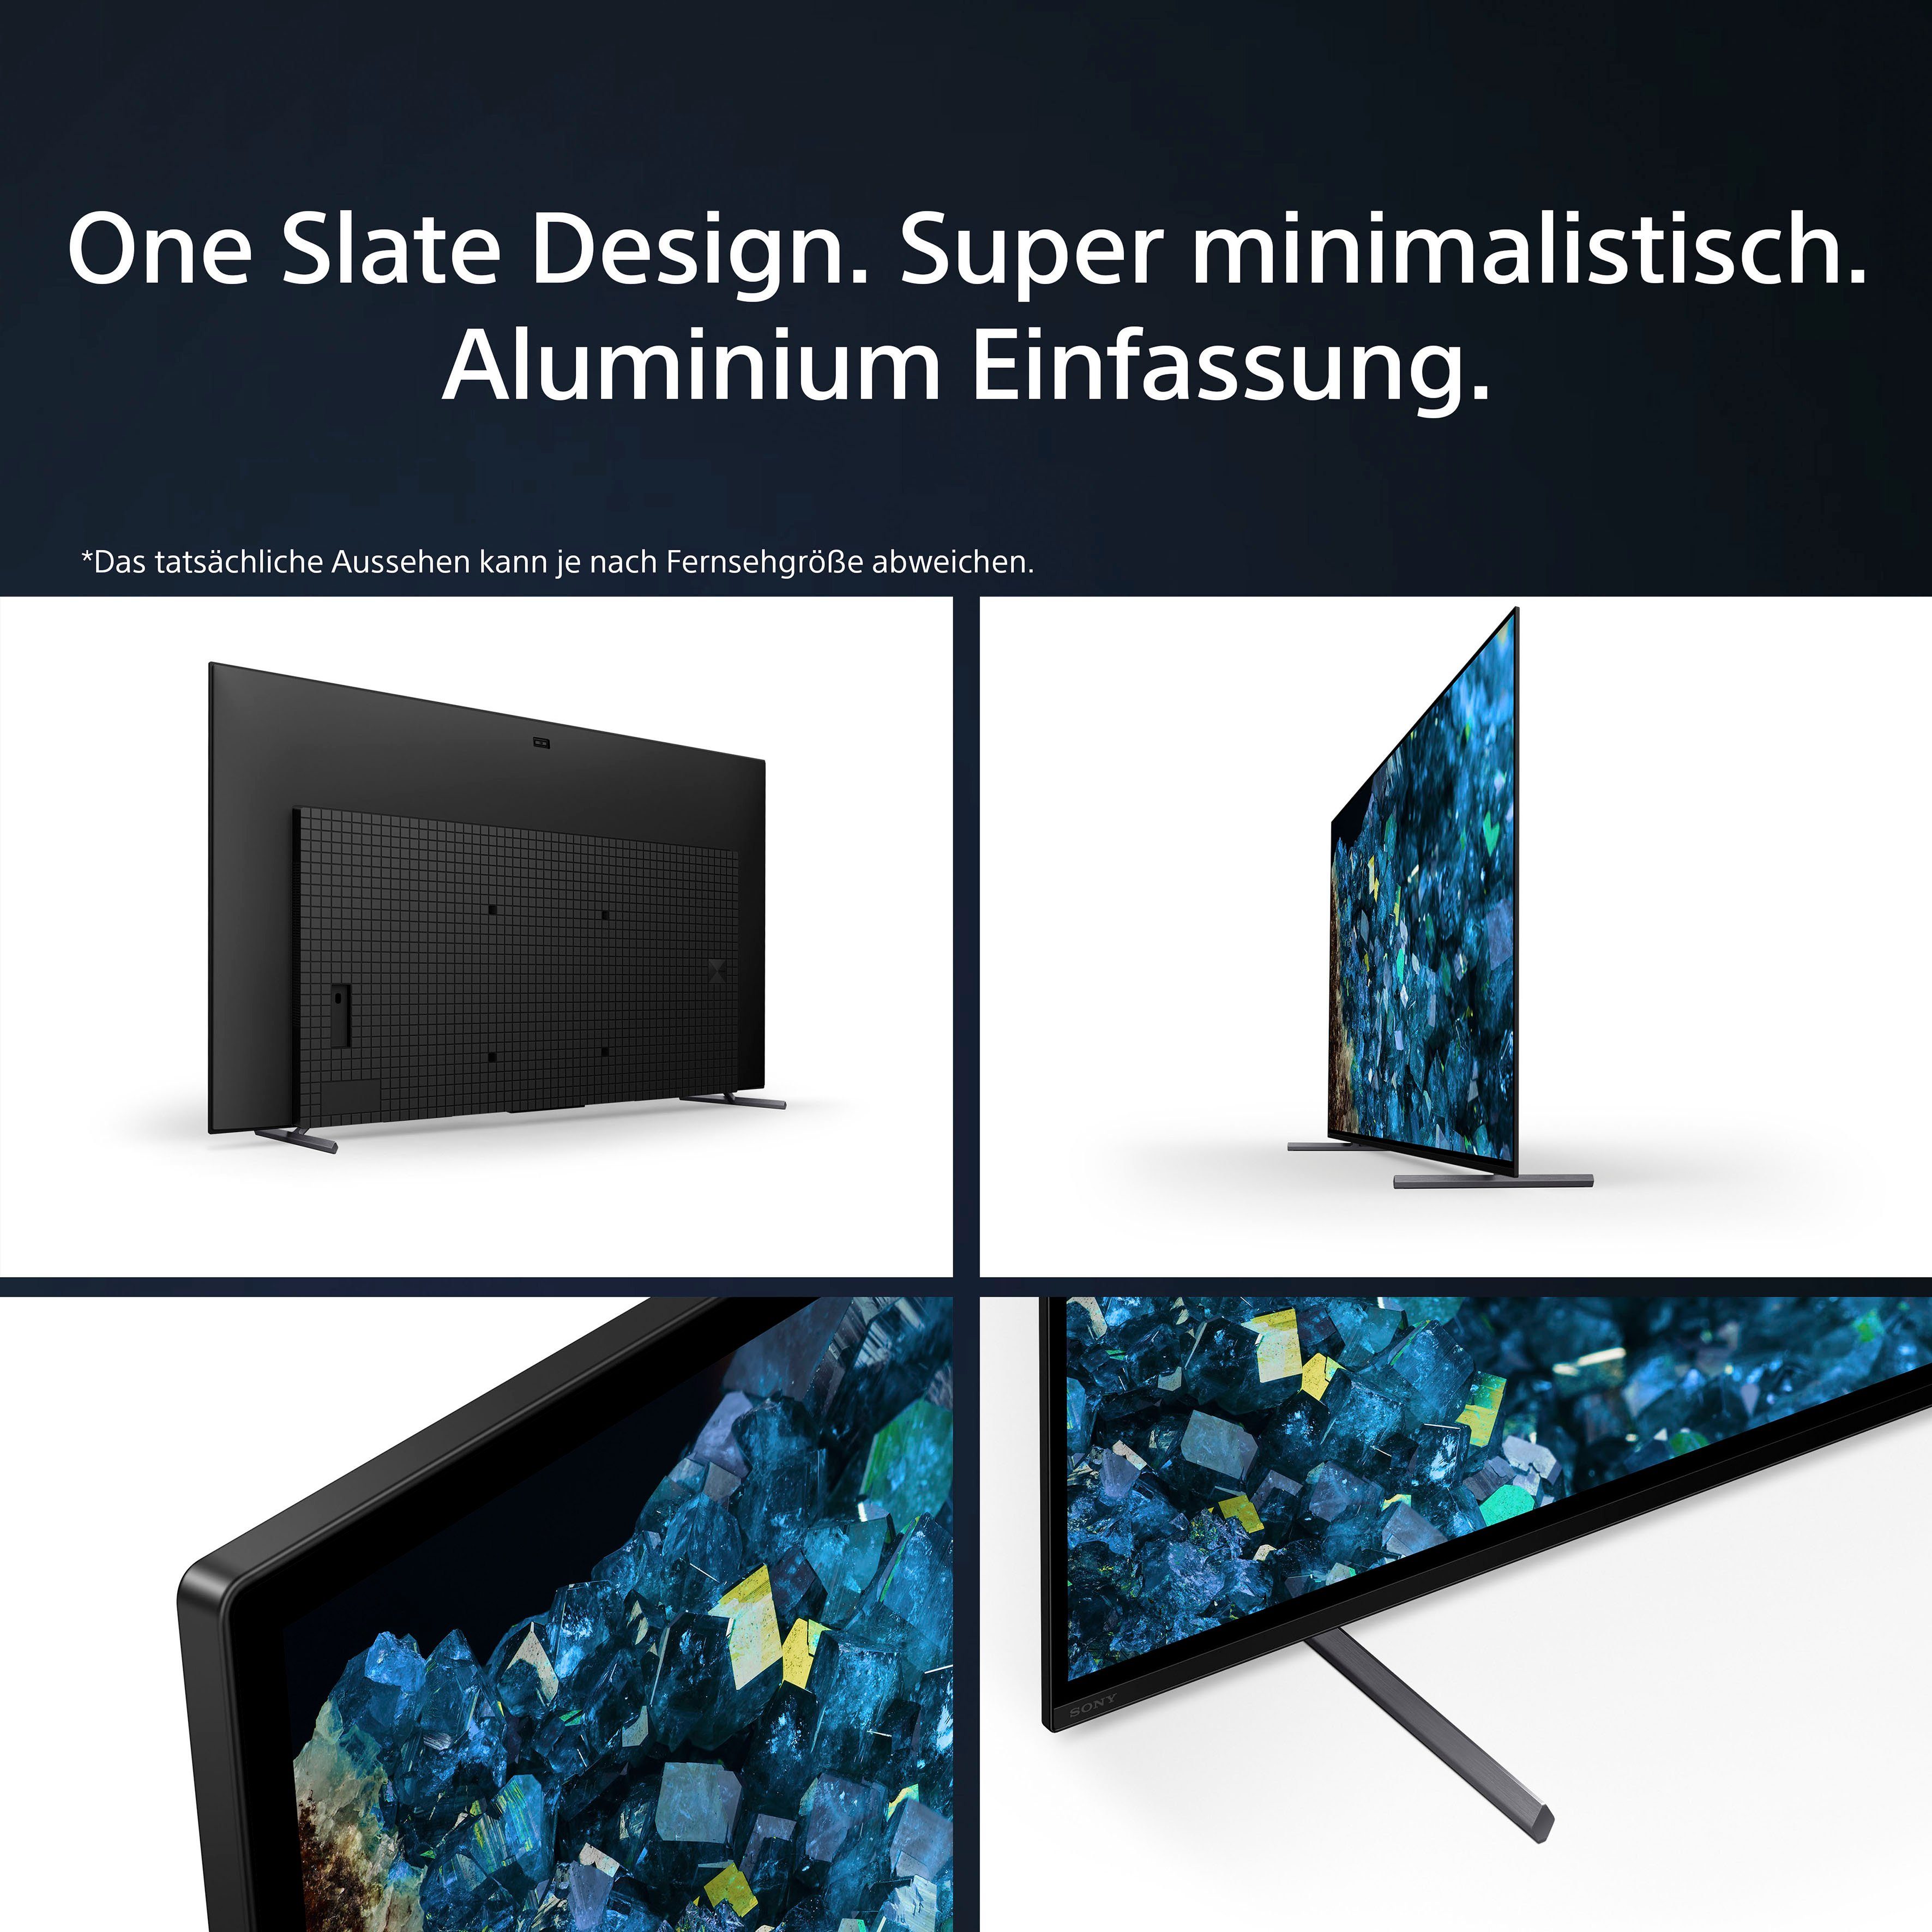 OLED-Fernseher TV, exklusiven Smart-TV, Android cm/65 HD, Zoll, PS5-Features) Smart-TV, XR-65A80L Google CORE, Sony BRAVIA mit (164 TRILUMINOS TV, PRO, 4K Ultra